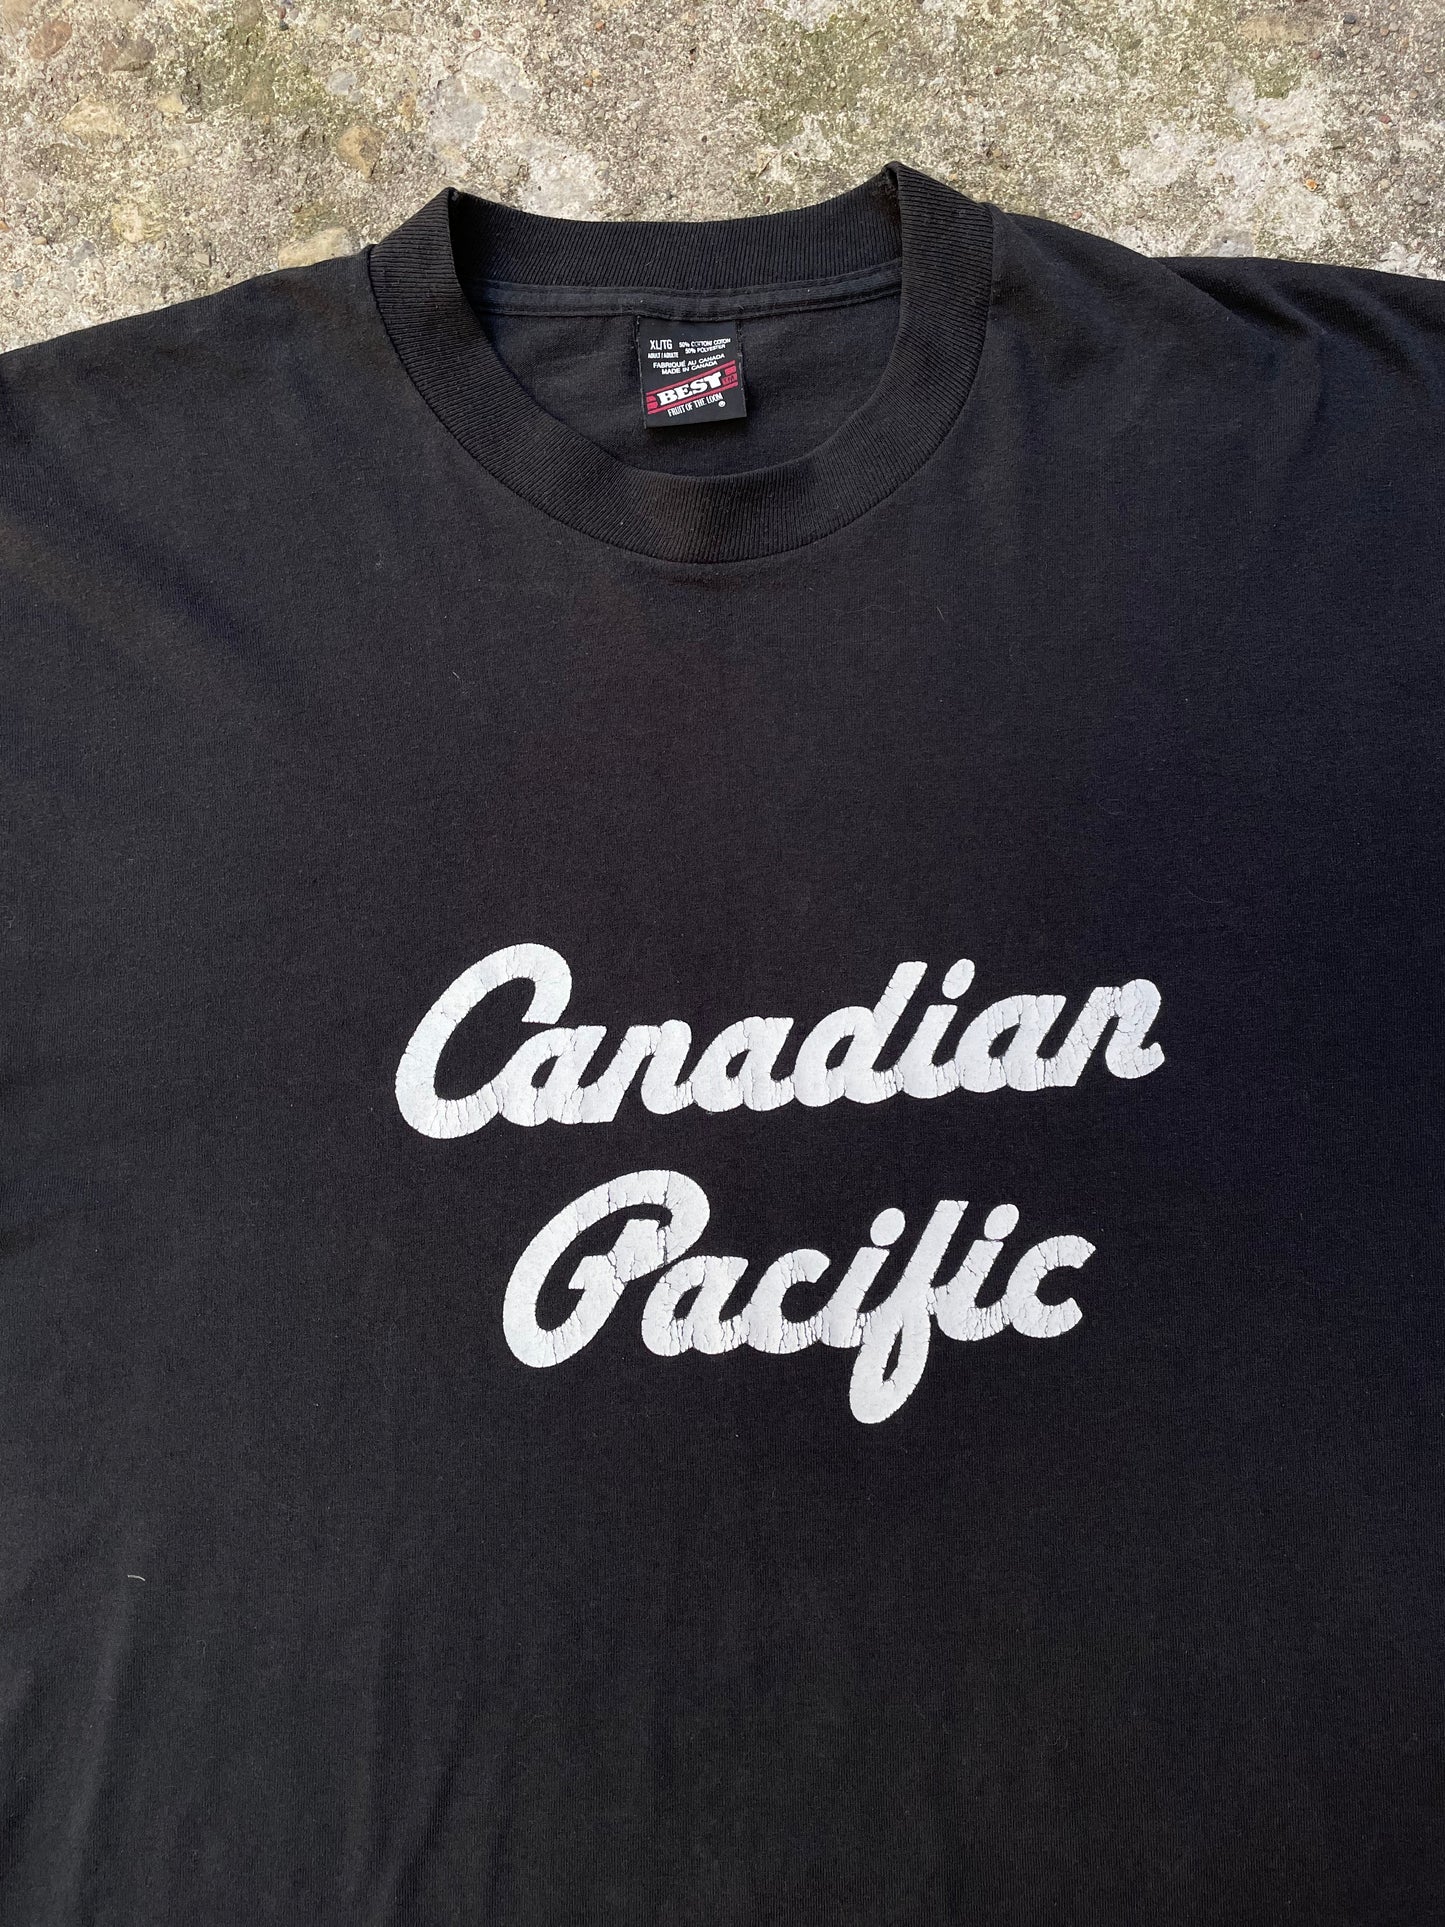 1990's Canadian Pacific Railway Graphic T-Shirt - XL